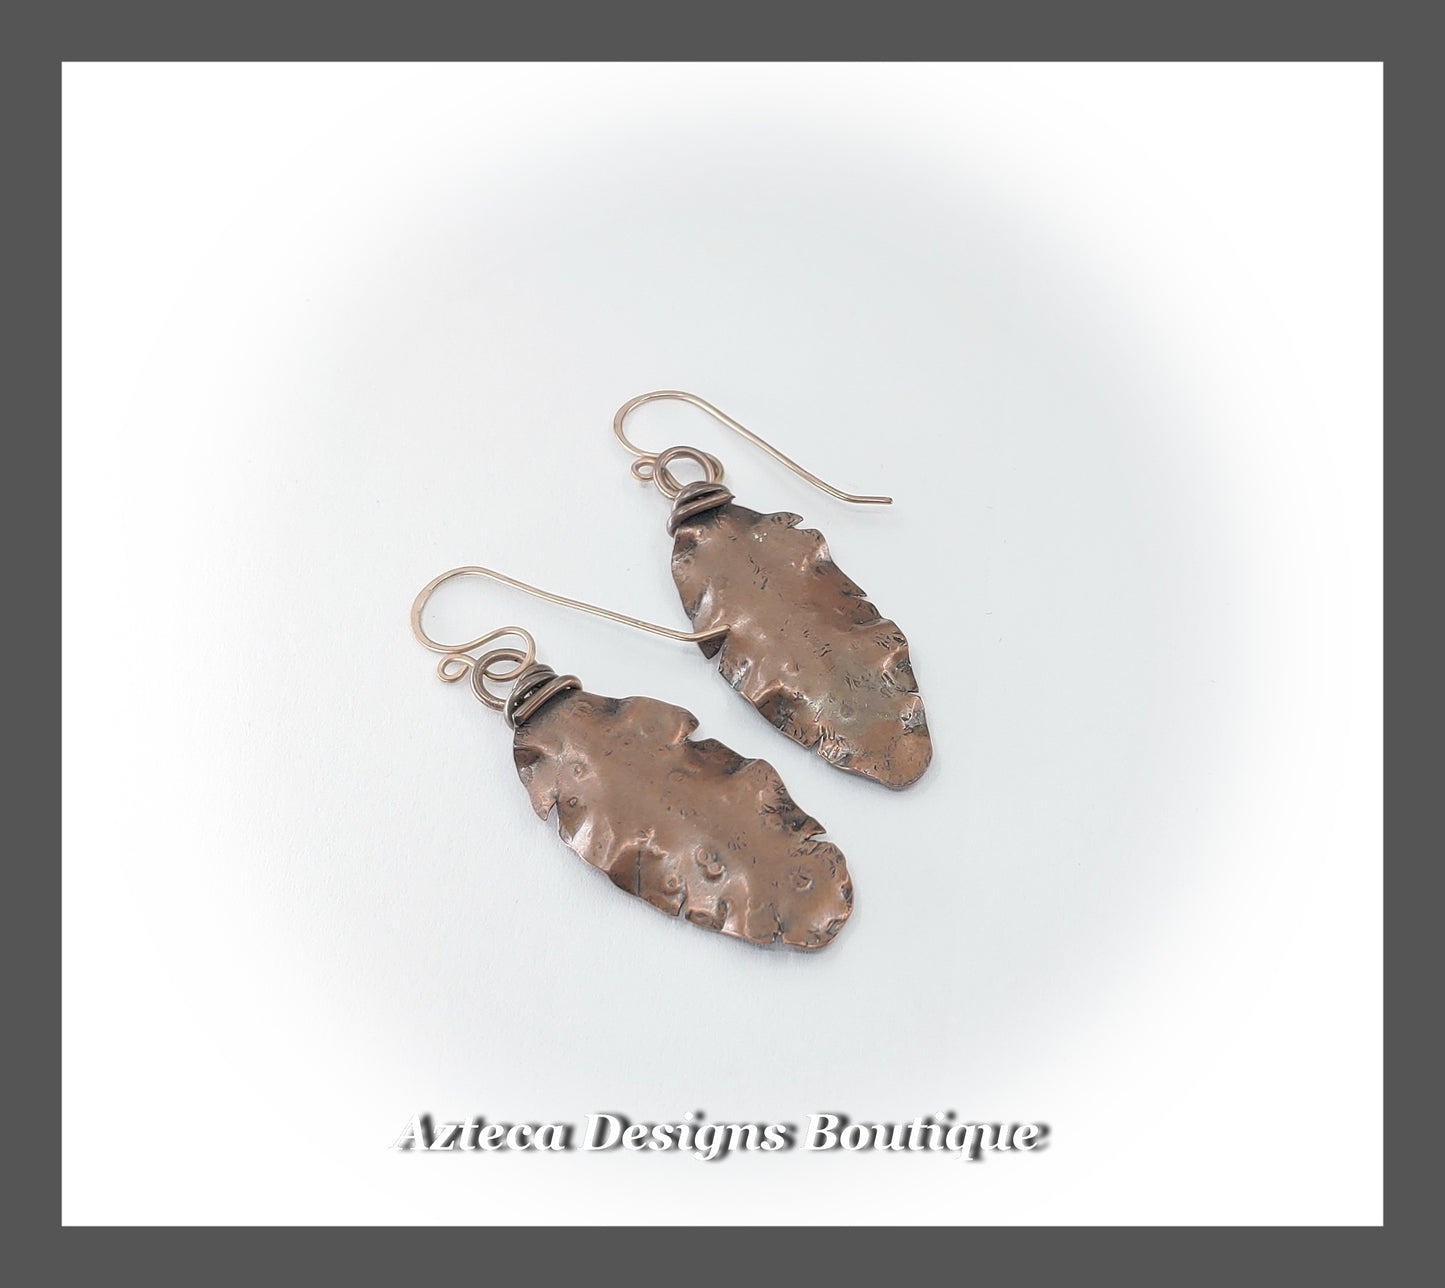 Teal Abalone + Hand Fabricated Rustic Copper Earrings With Rose Gold Filled Ear Wires